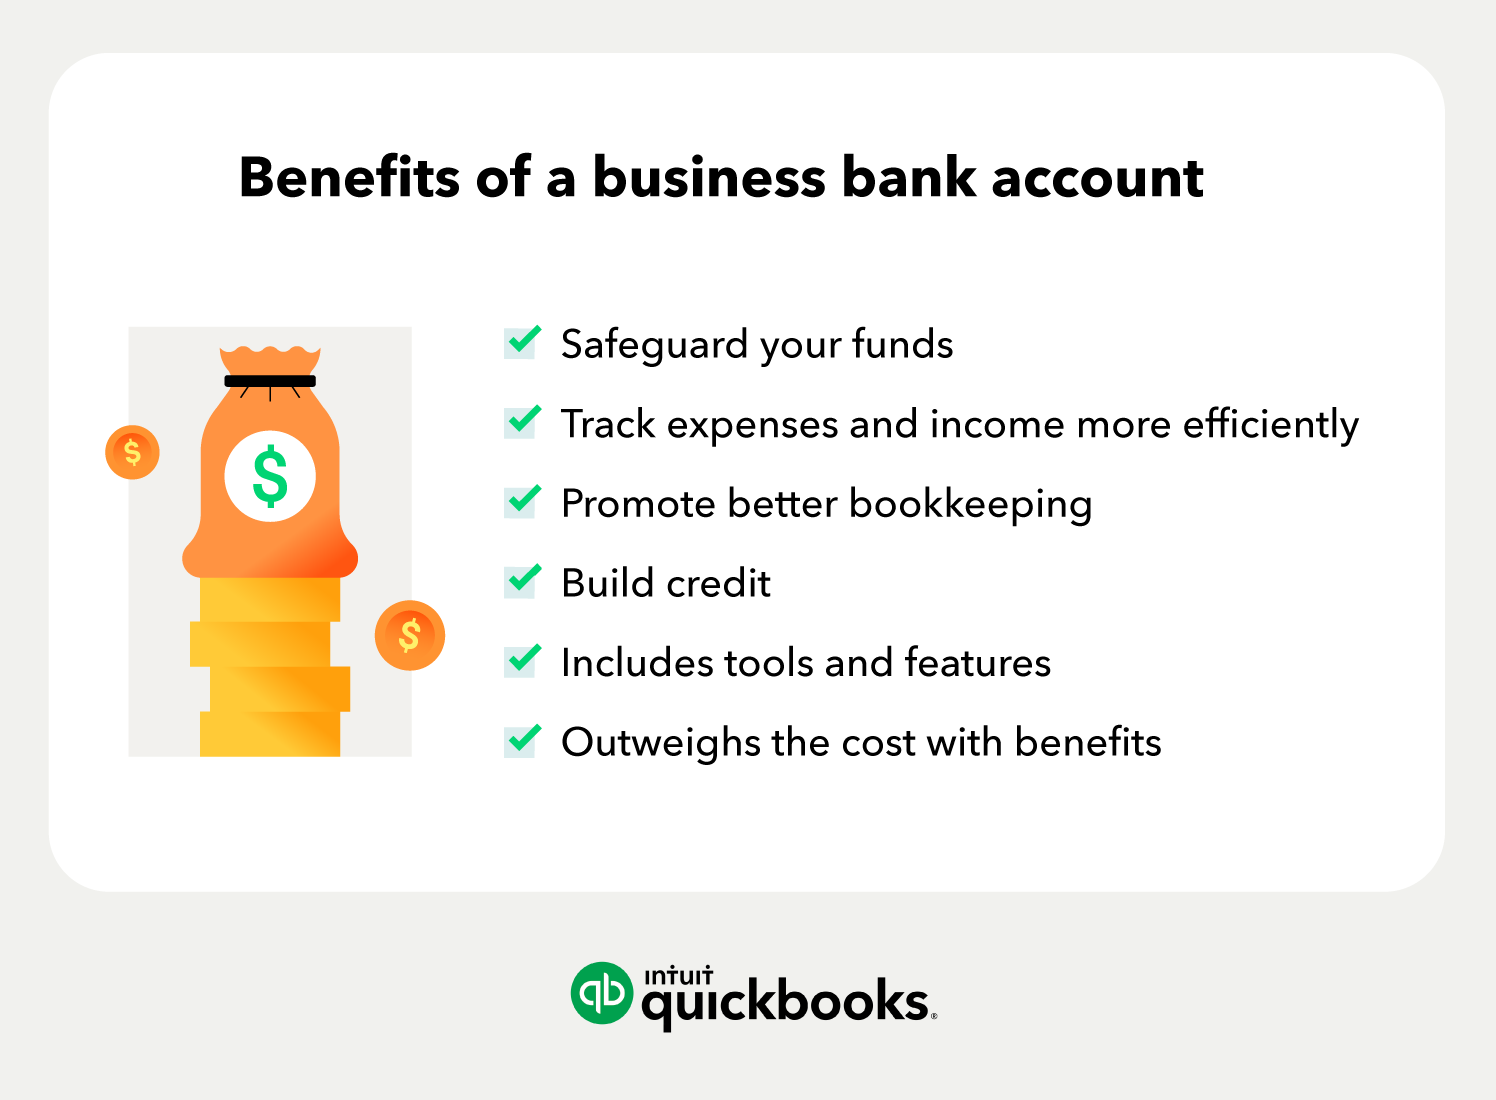 Benefits of a business bank account